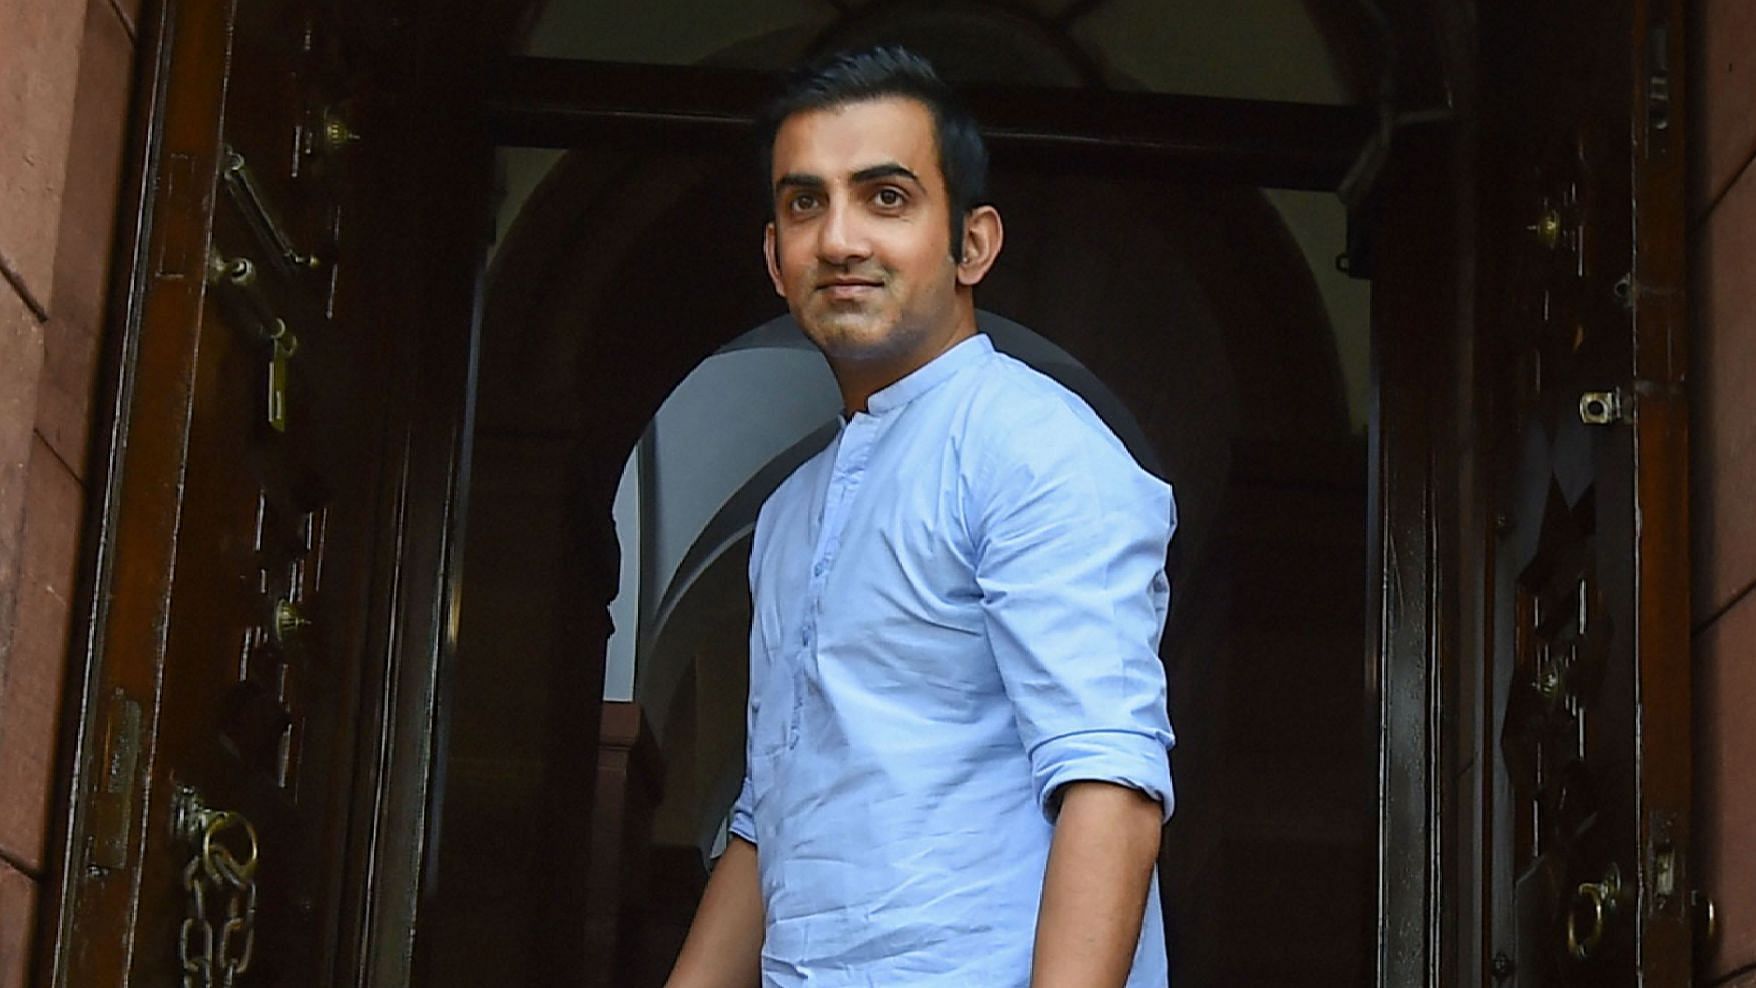 Gautam Gambhir has isolated himself as there was a coronavirus positive case in his house.